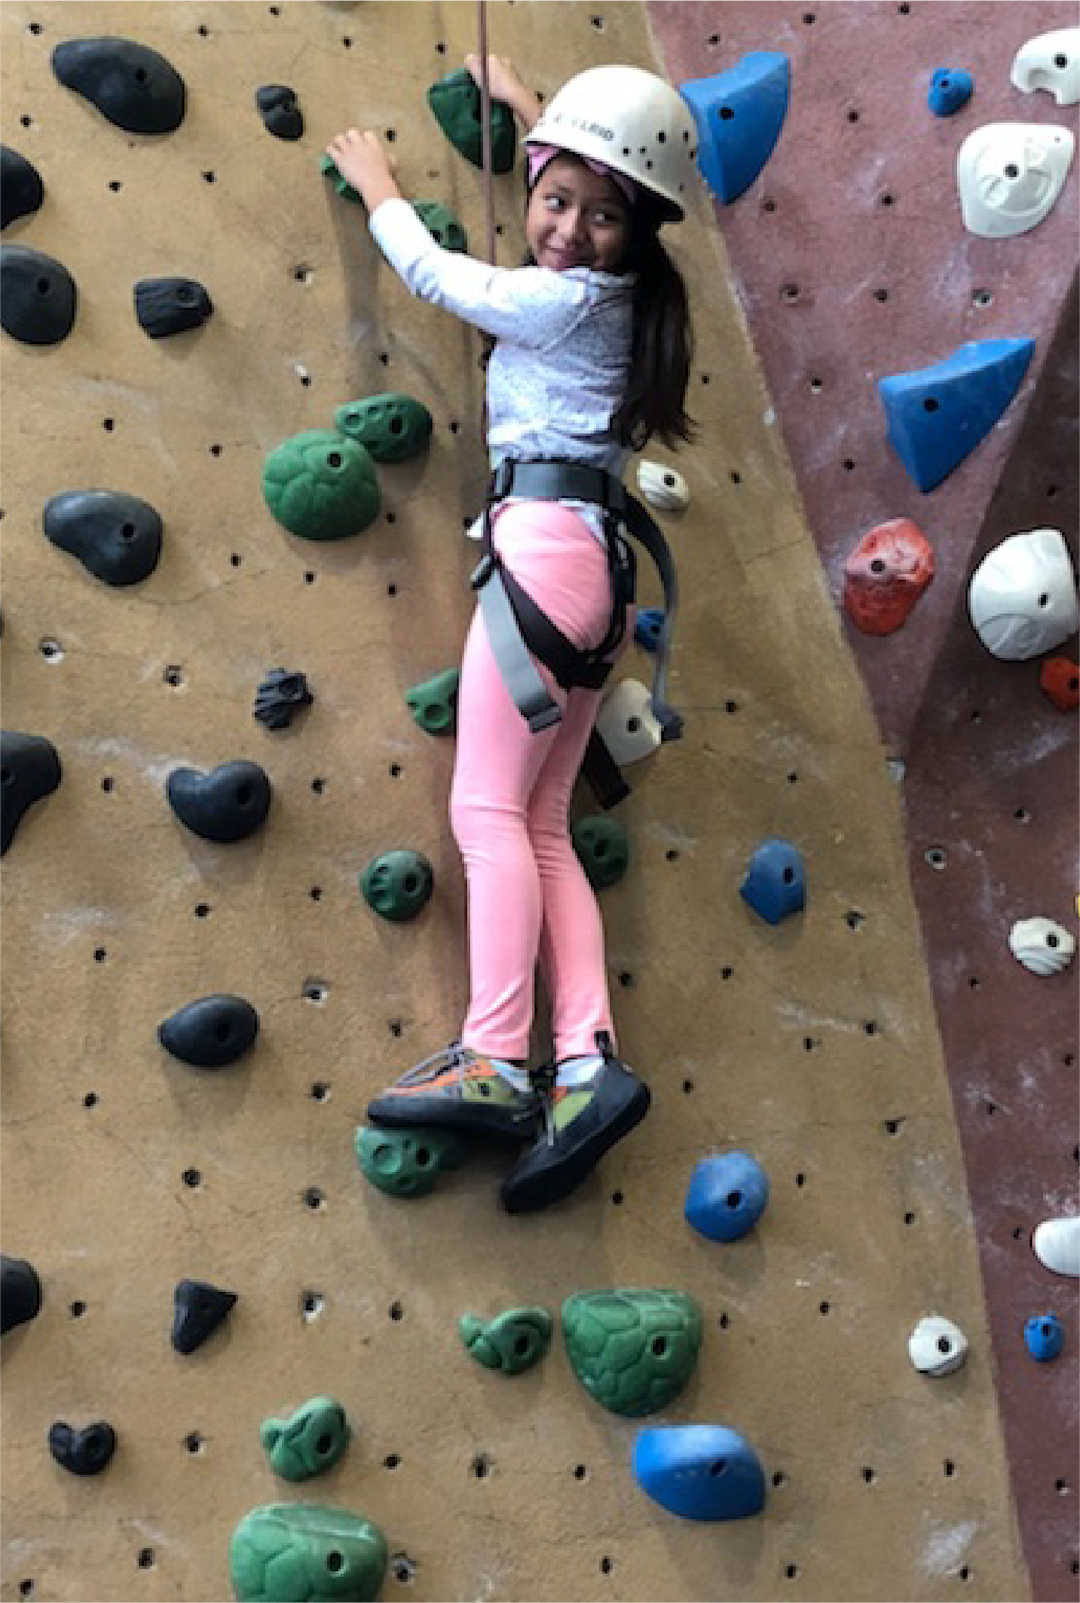 A young girl ascends a rock-climbing wall